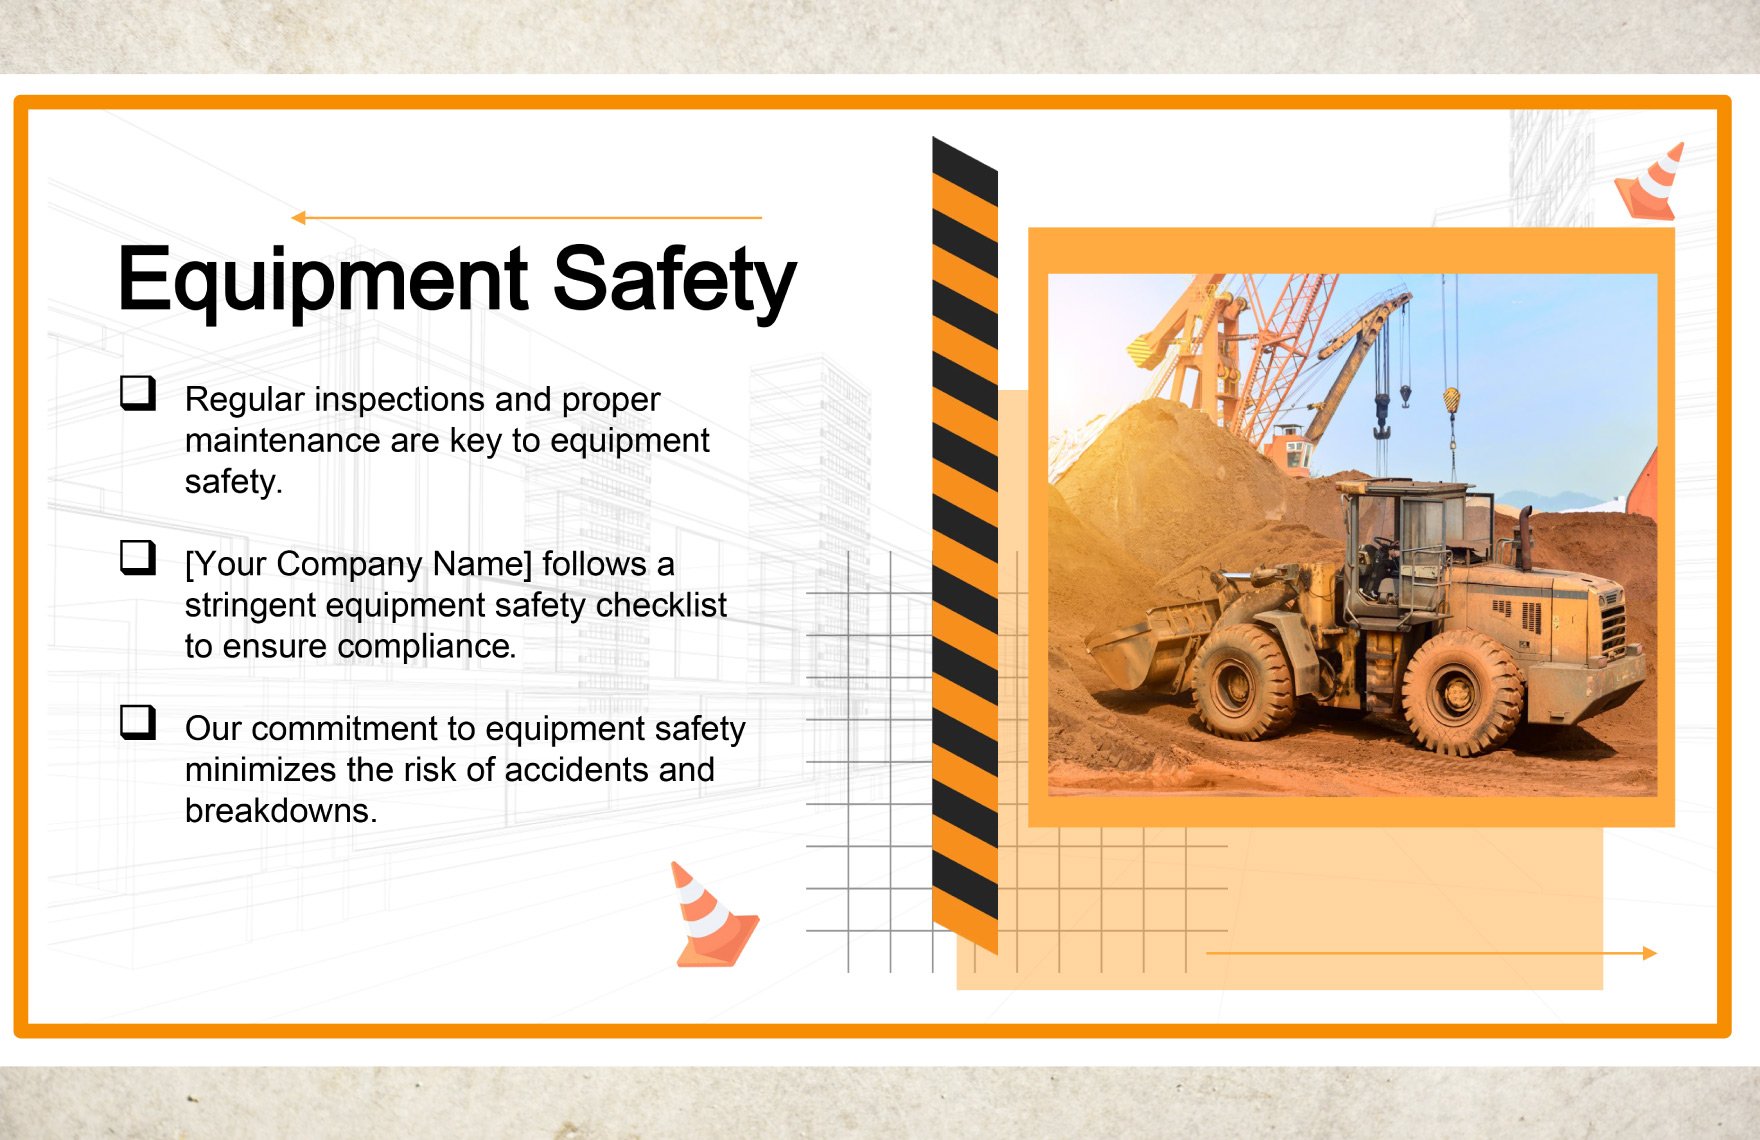 Construction Site Safety Measures Presentation Template